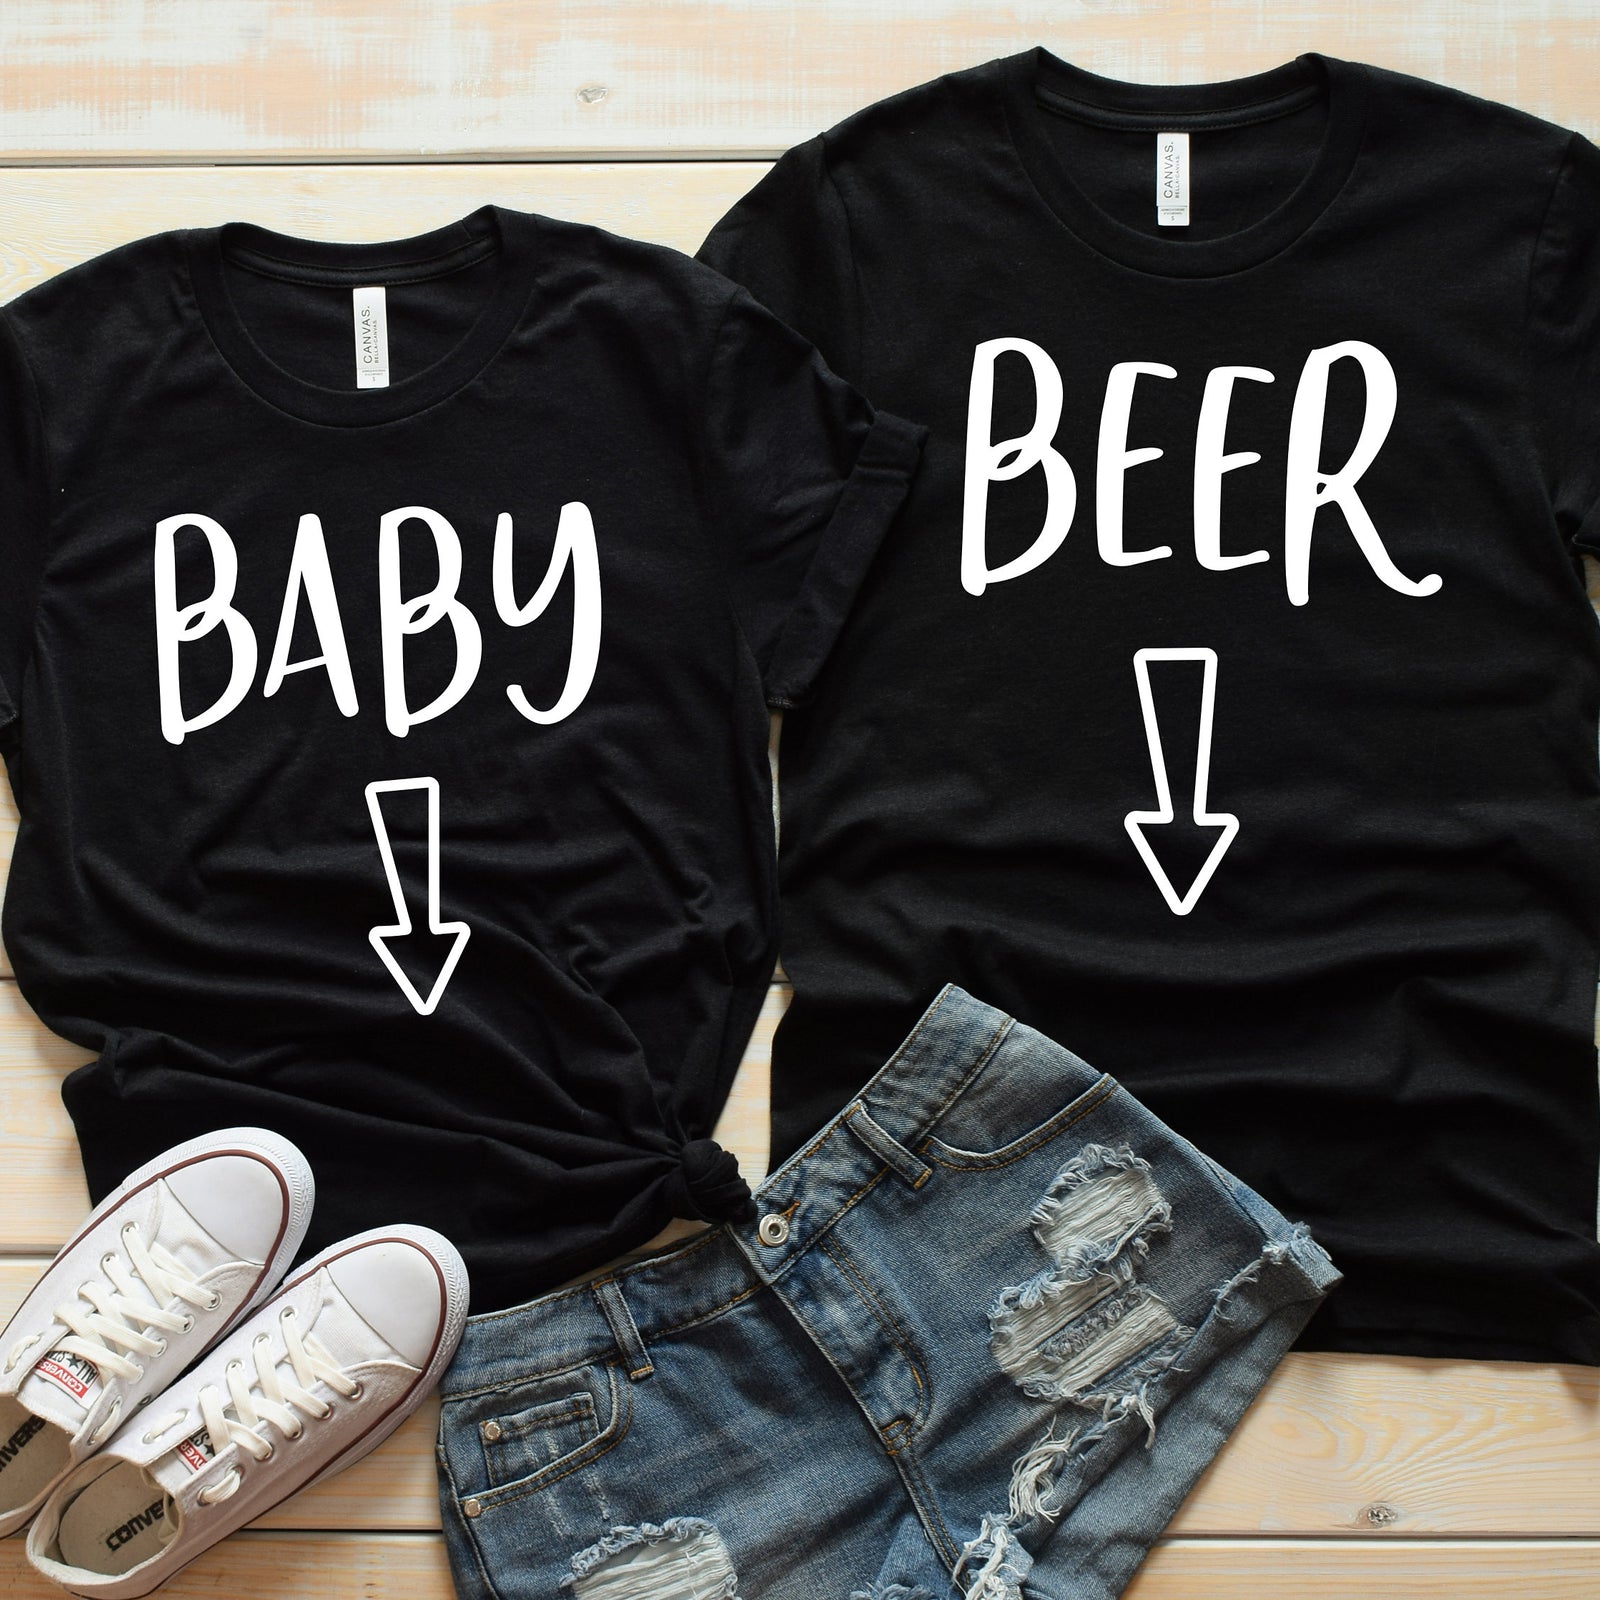 Baby and Beer T Shirts - Funny Matching Shirts - Cute Pregnancy Announcement Shirts -  Parents to Be Couple Shirt - Reveal